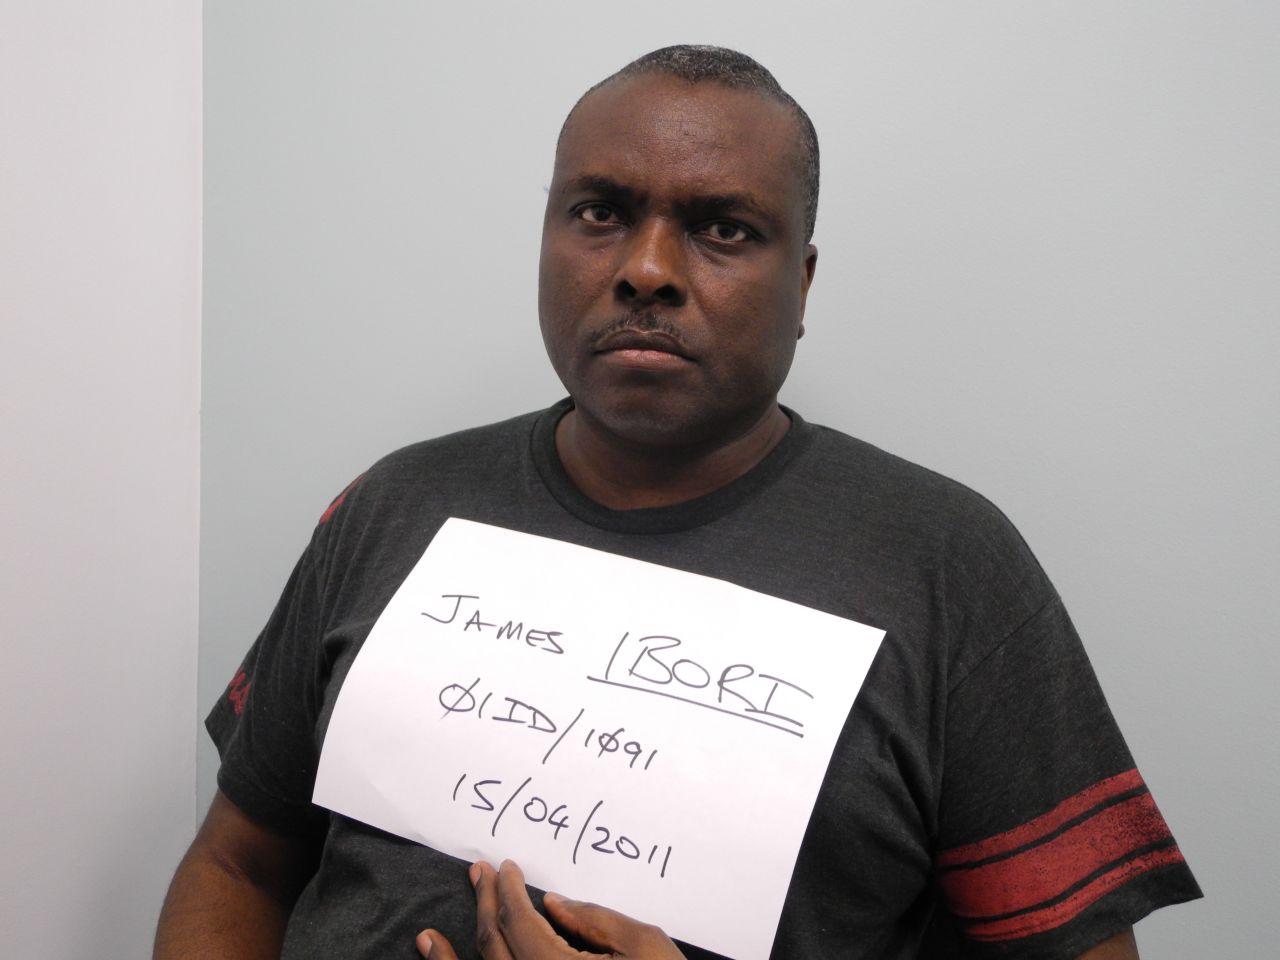 Nigerian politicians are immune from prosecution while in office but ,five years after his term as governor ended and after being extradited from Dubai, James Ibori, 49, was tried, convicted and sentenced to 13 years for embezzling millions of dollars of public money.